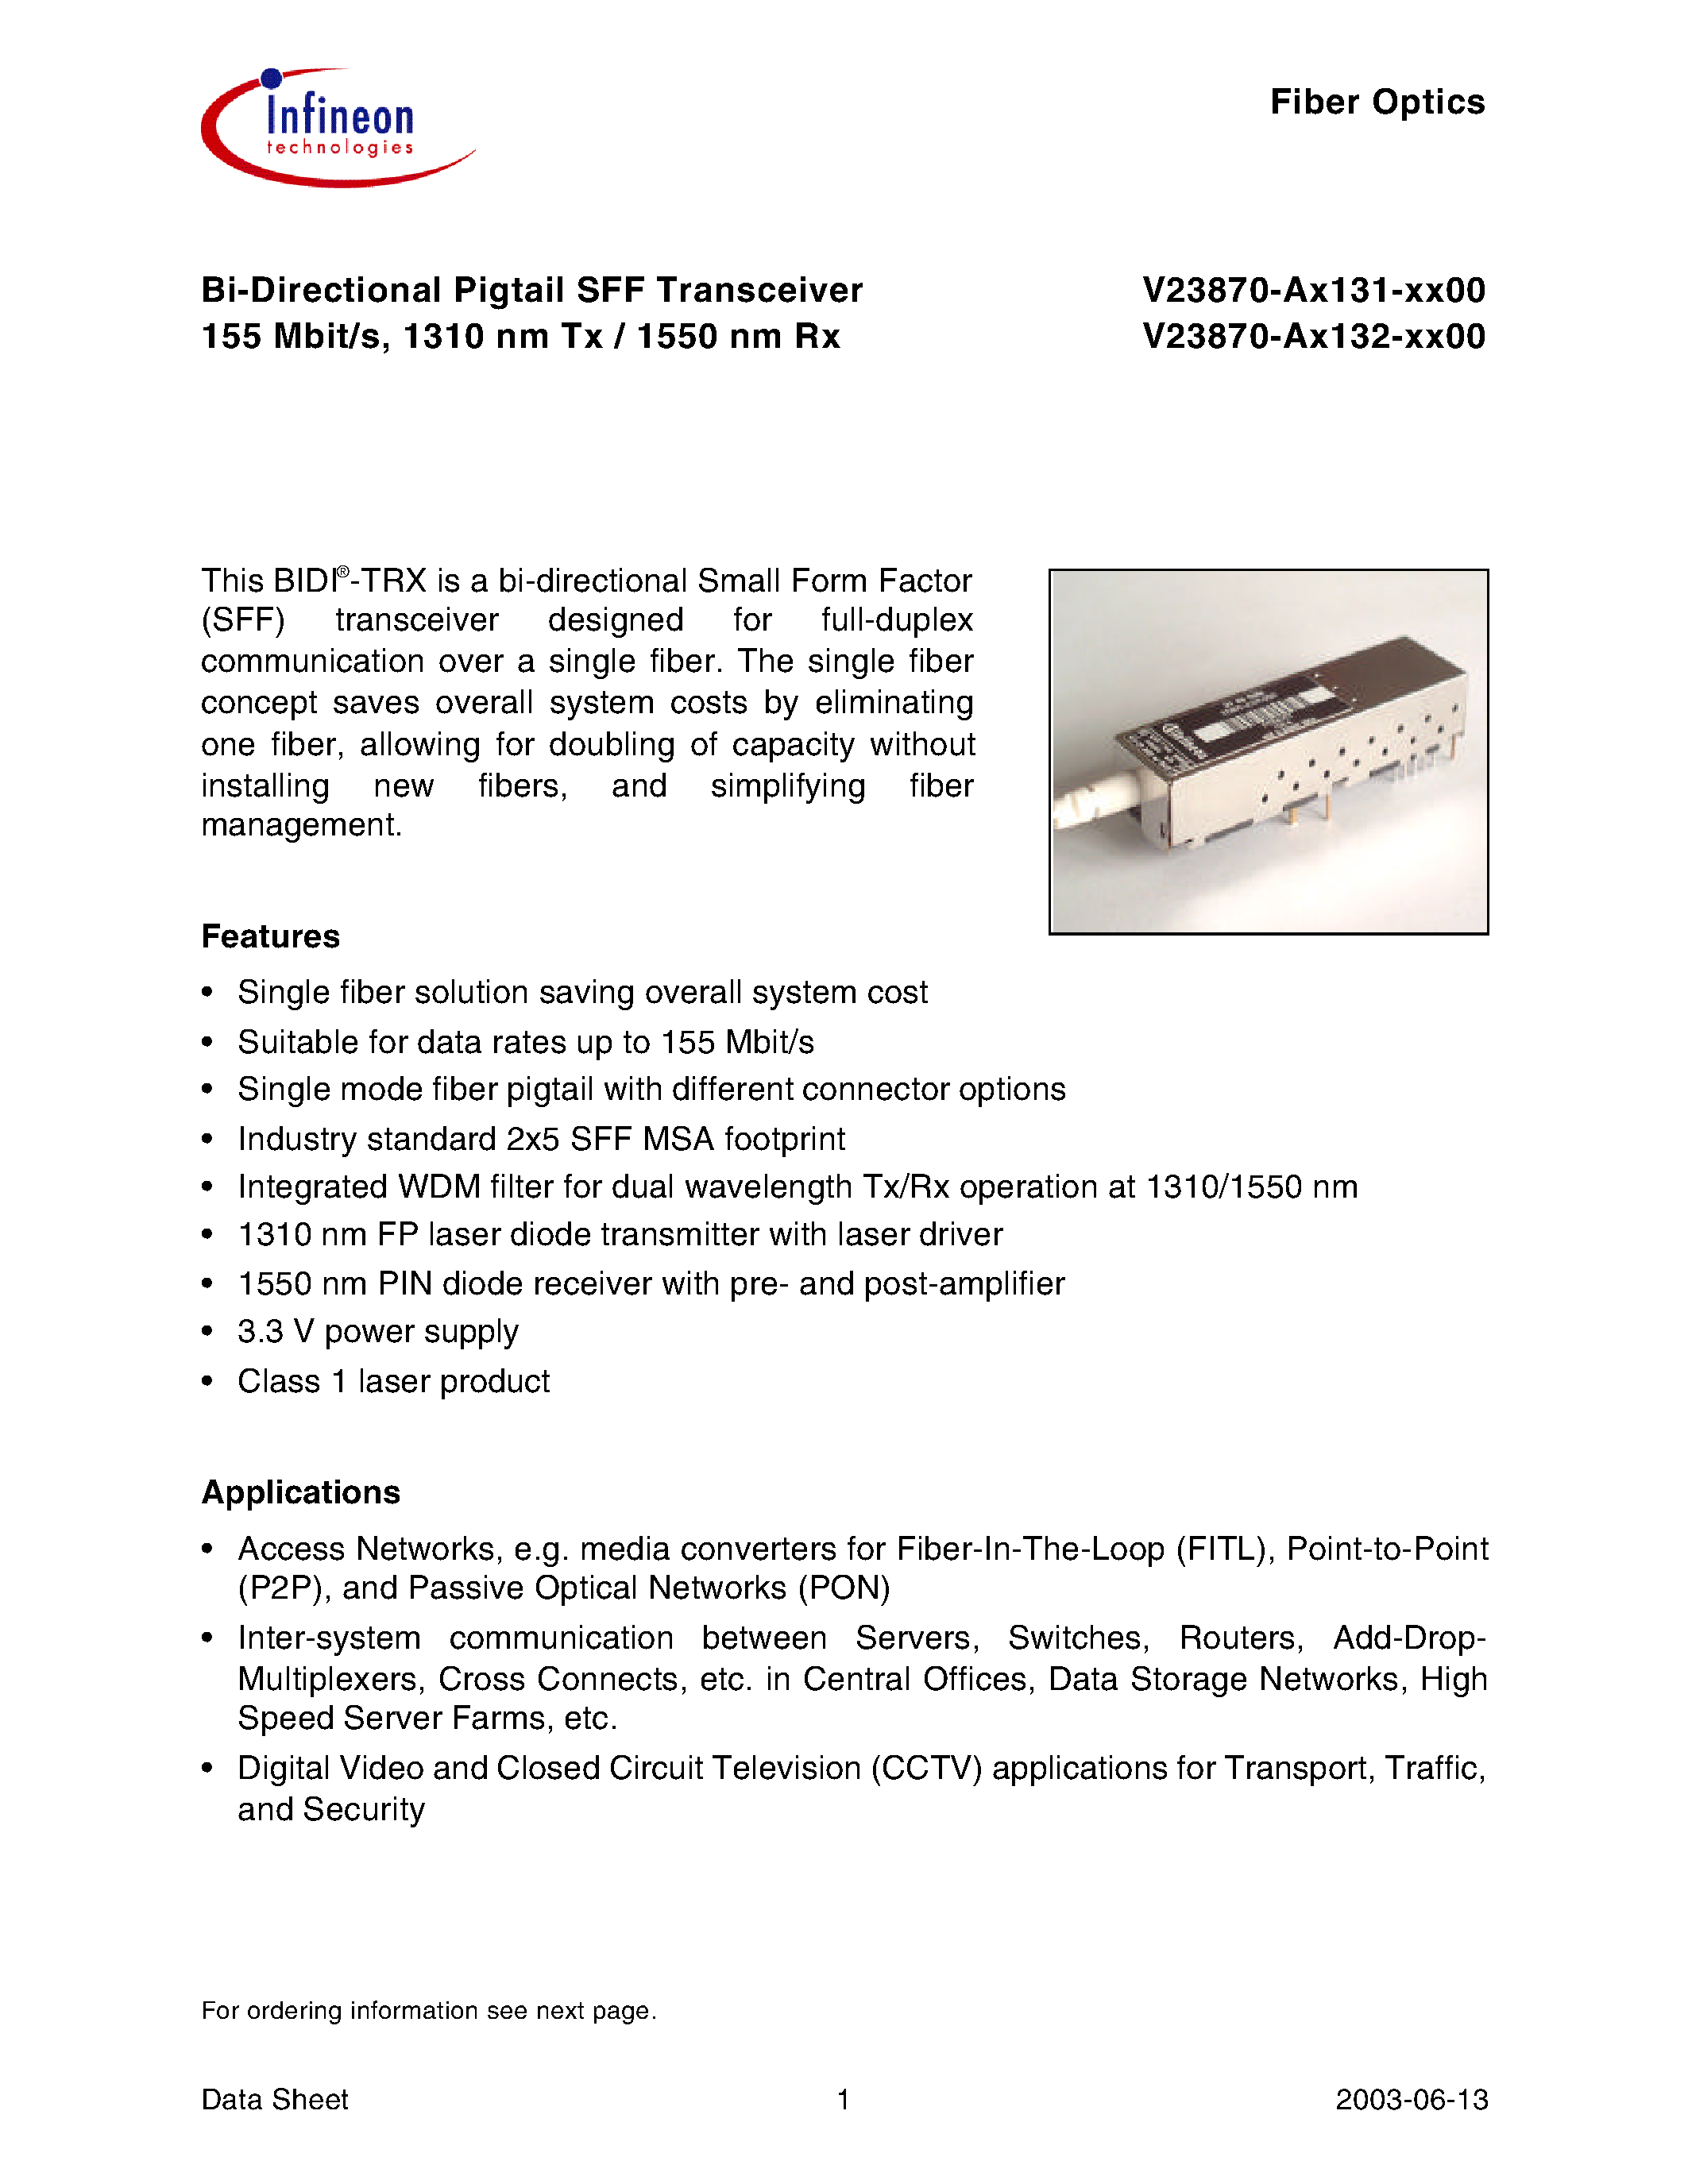 Datasheet V23870-A3132-F500 - Bi-Directional Pigtail SFF Transceiver 155 Mbit/s/ 1310 nm Tx / 1550 nm Rx page 1